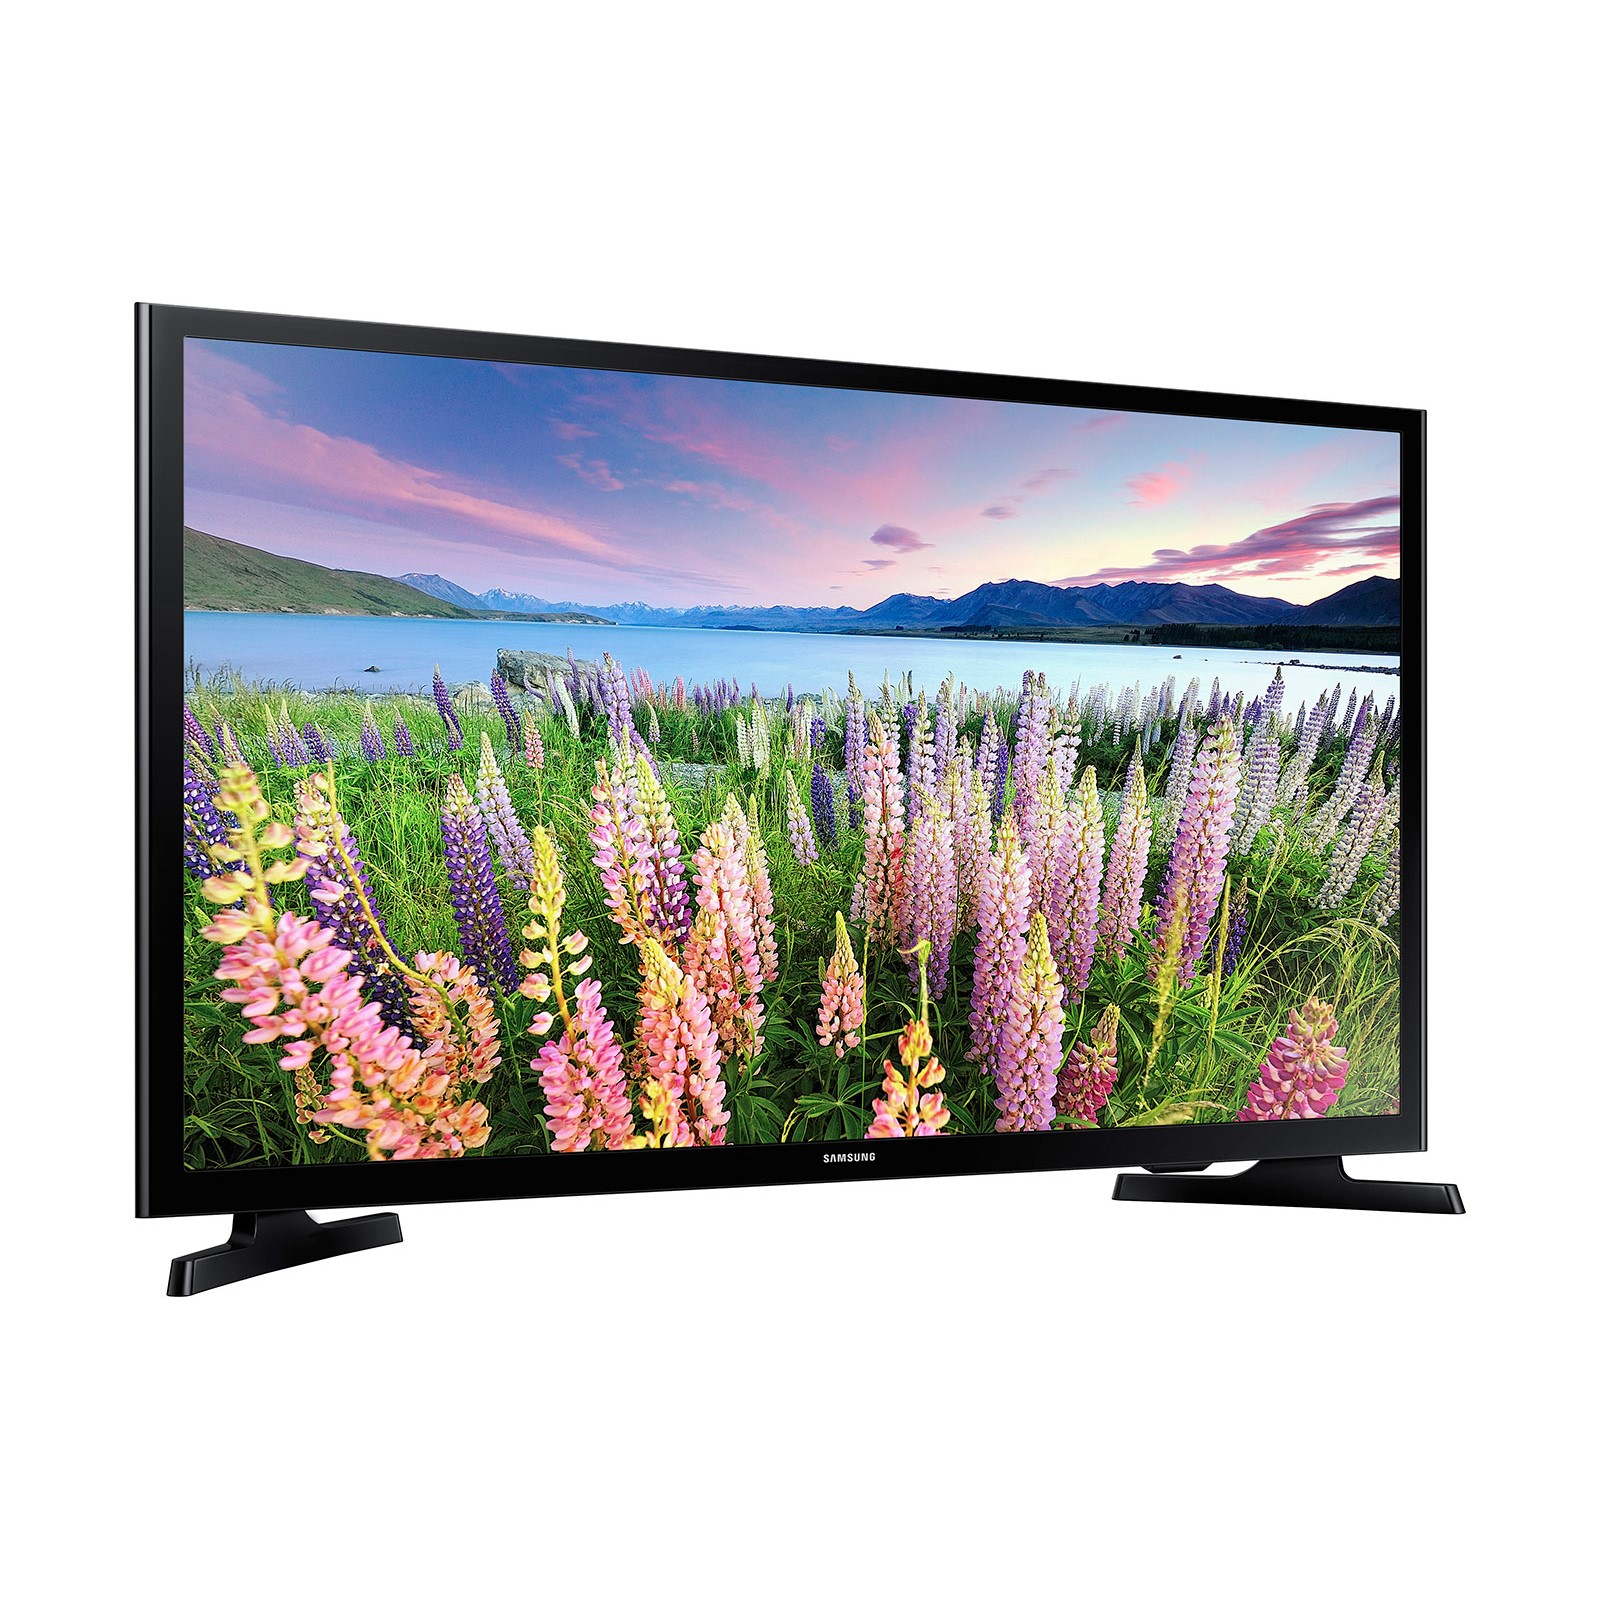 SAMSUNG 40" Class N5200 Series Full HD (1080P) LED Smart Television - UN40N5200AFXZA - image 2 of 5